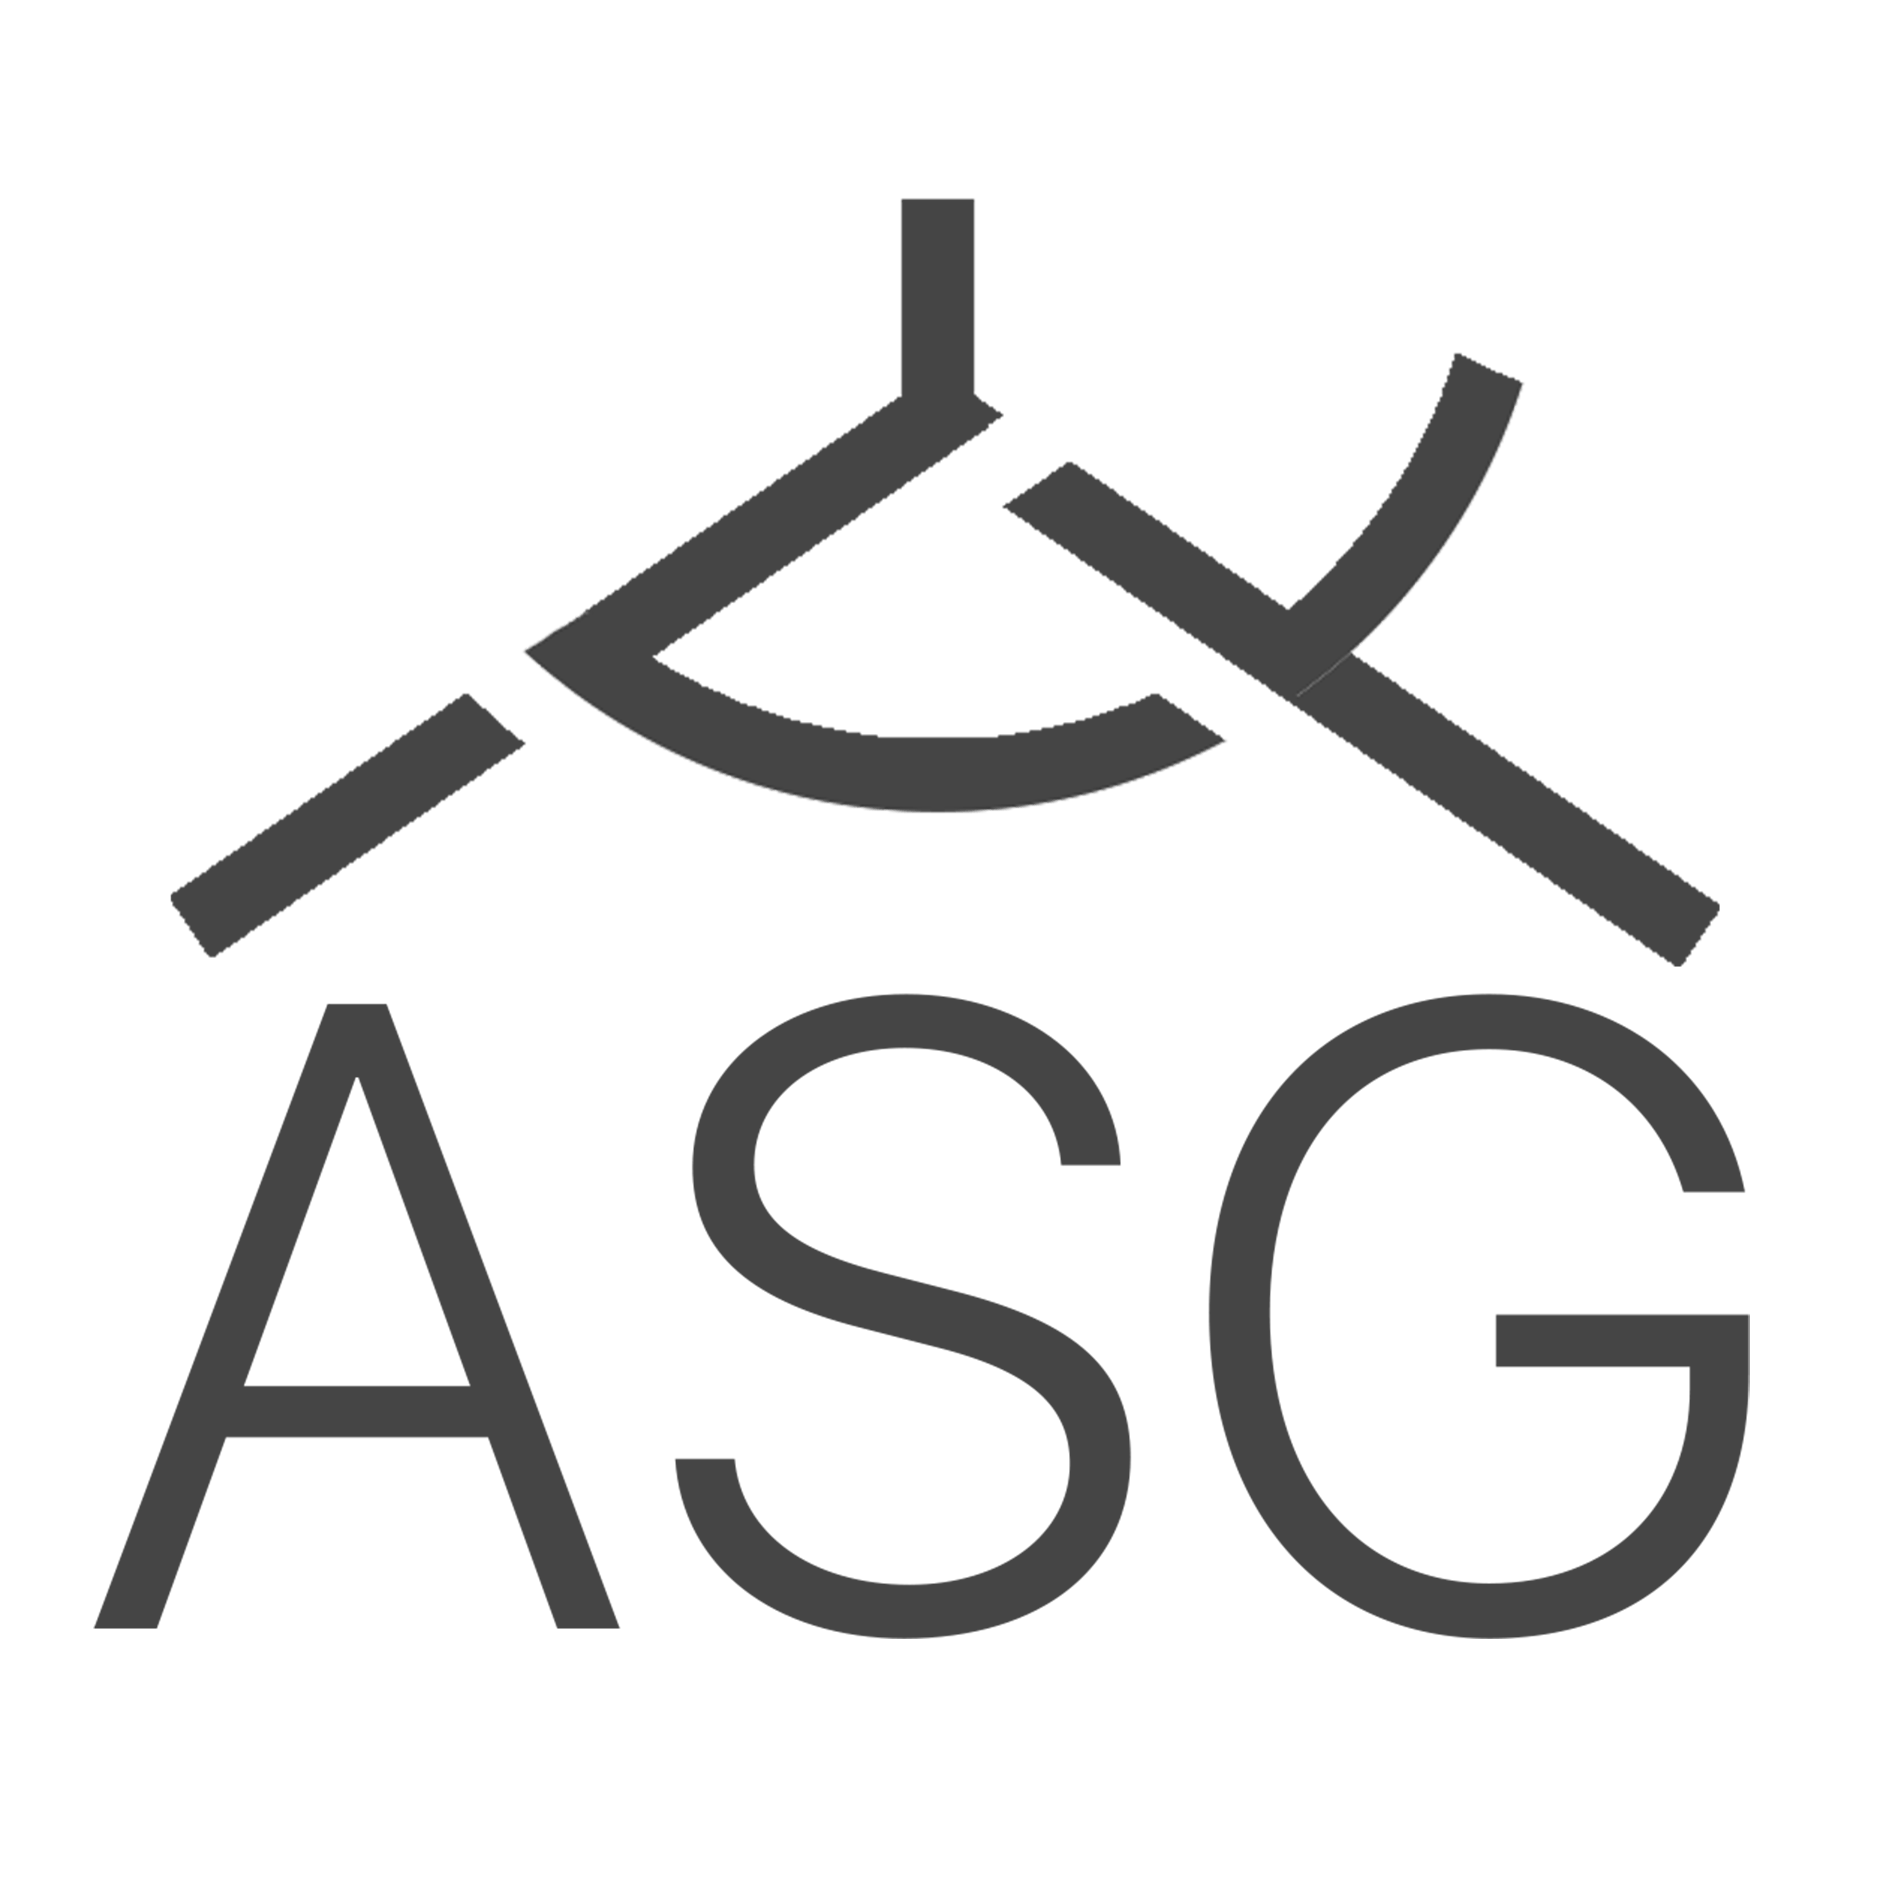 ASG Logo - Architecture for your home and business - Architectural Services Group